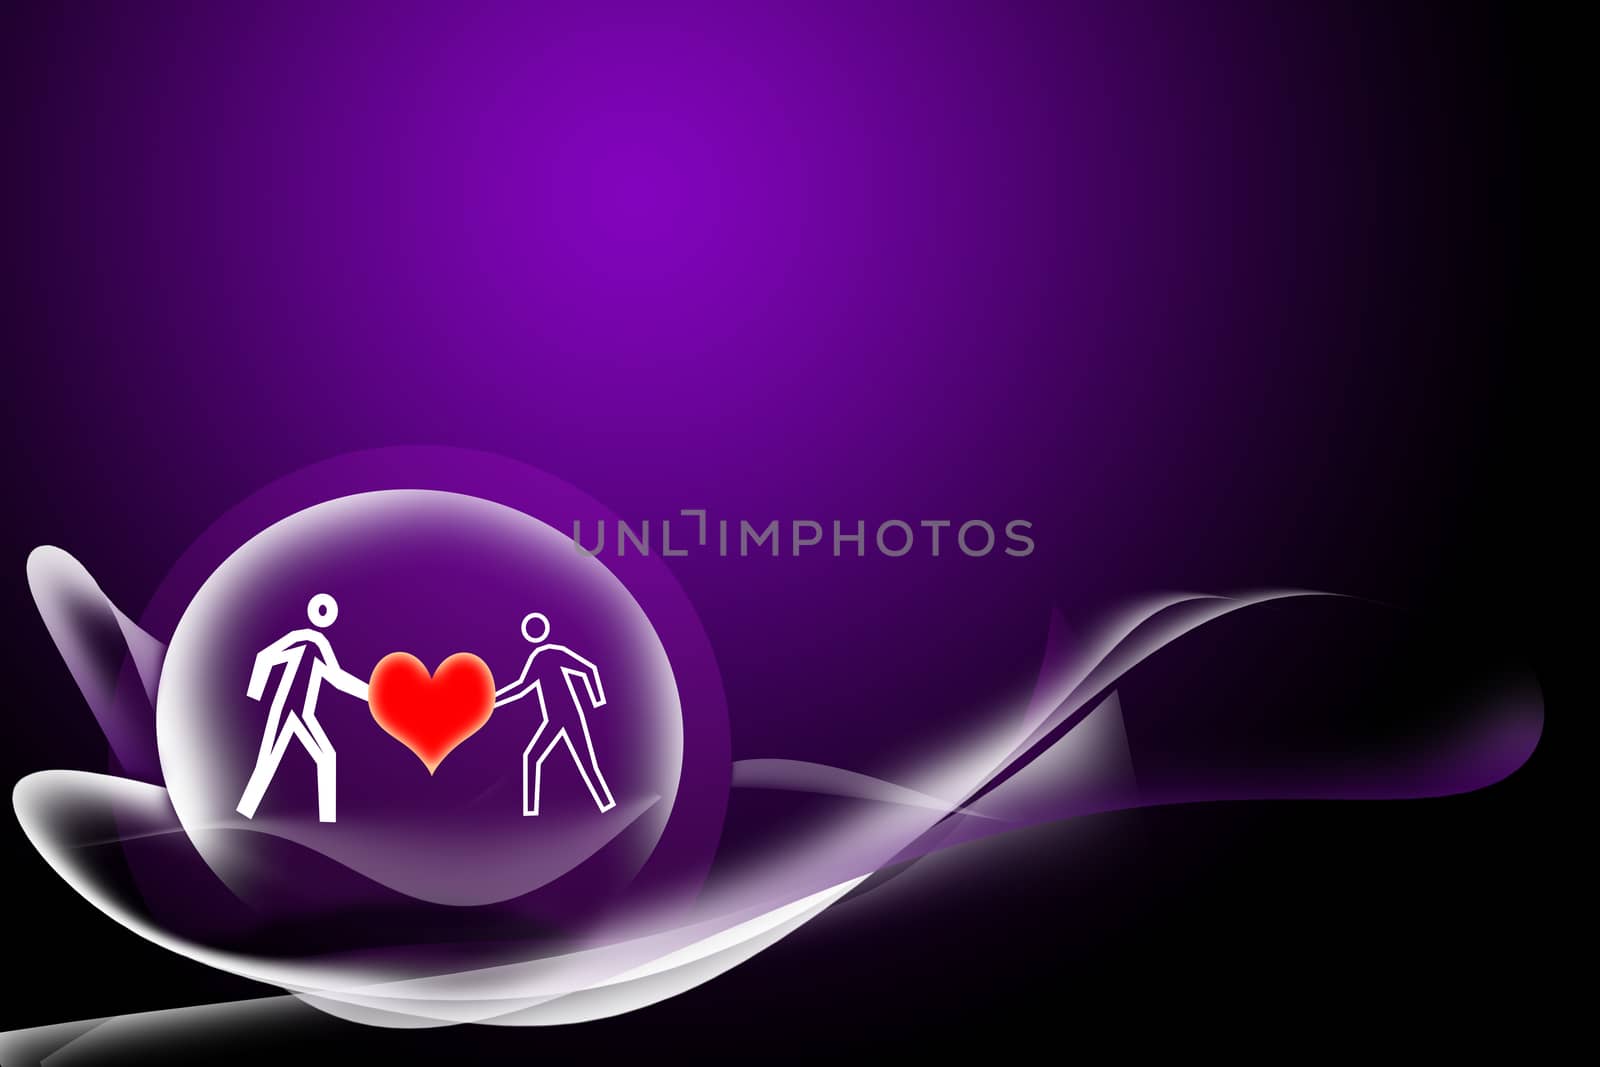 abstract curve and heart purple background